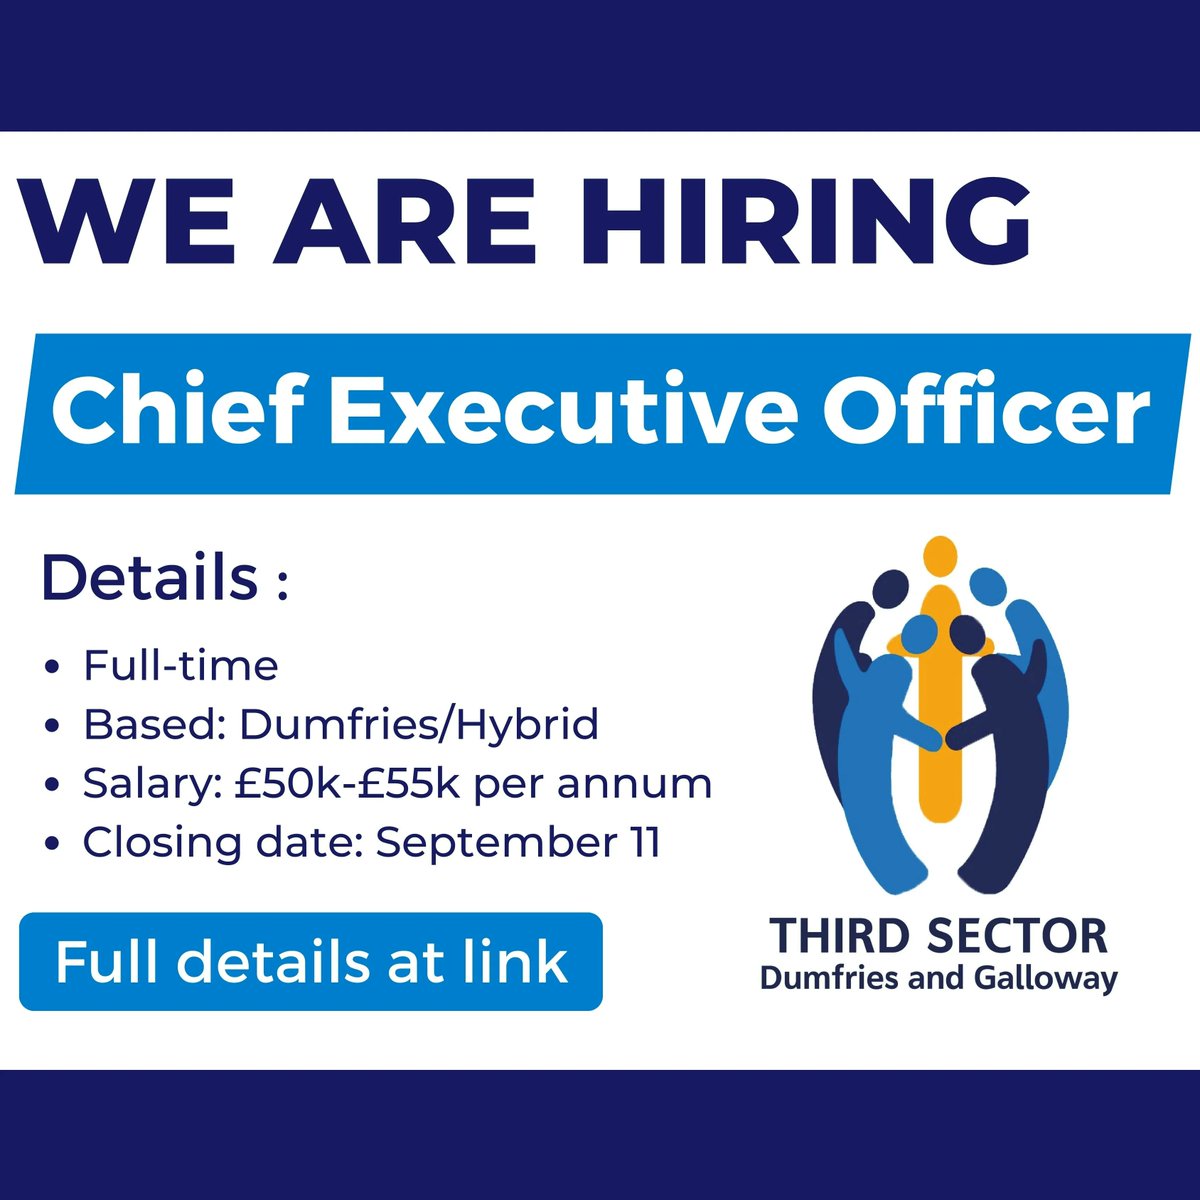 Have you got the skills and experience to become our new Chief Executive Officer? Discover more about the role here: buff.ly/3YWSlFP

#thirdsectordg #thirdsectorjobs #dumfriesandgalloway